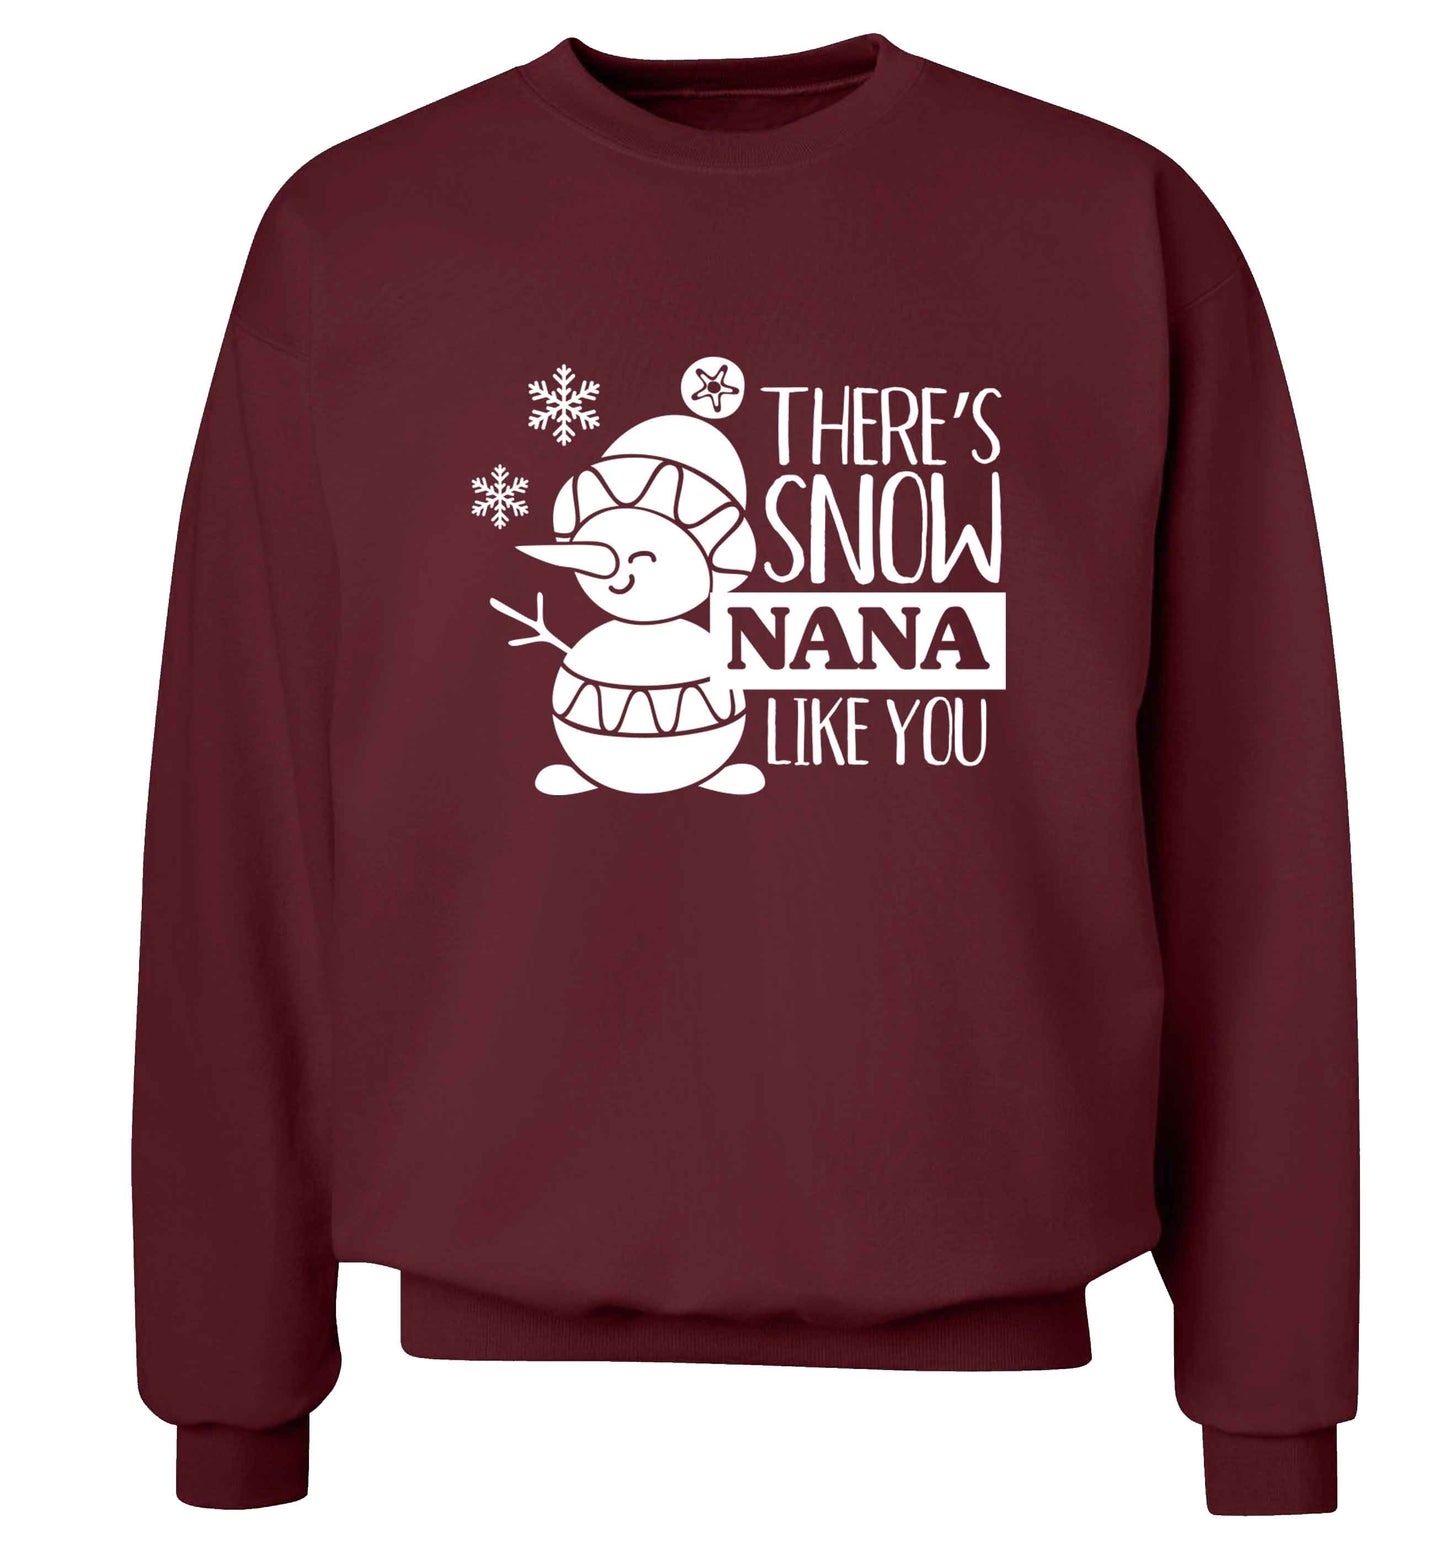 There's snow nana like you adult's unisex maroon sweater 2XL